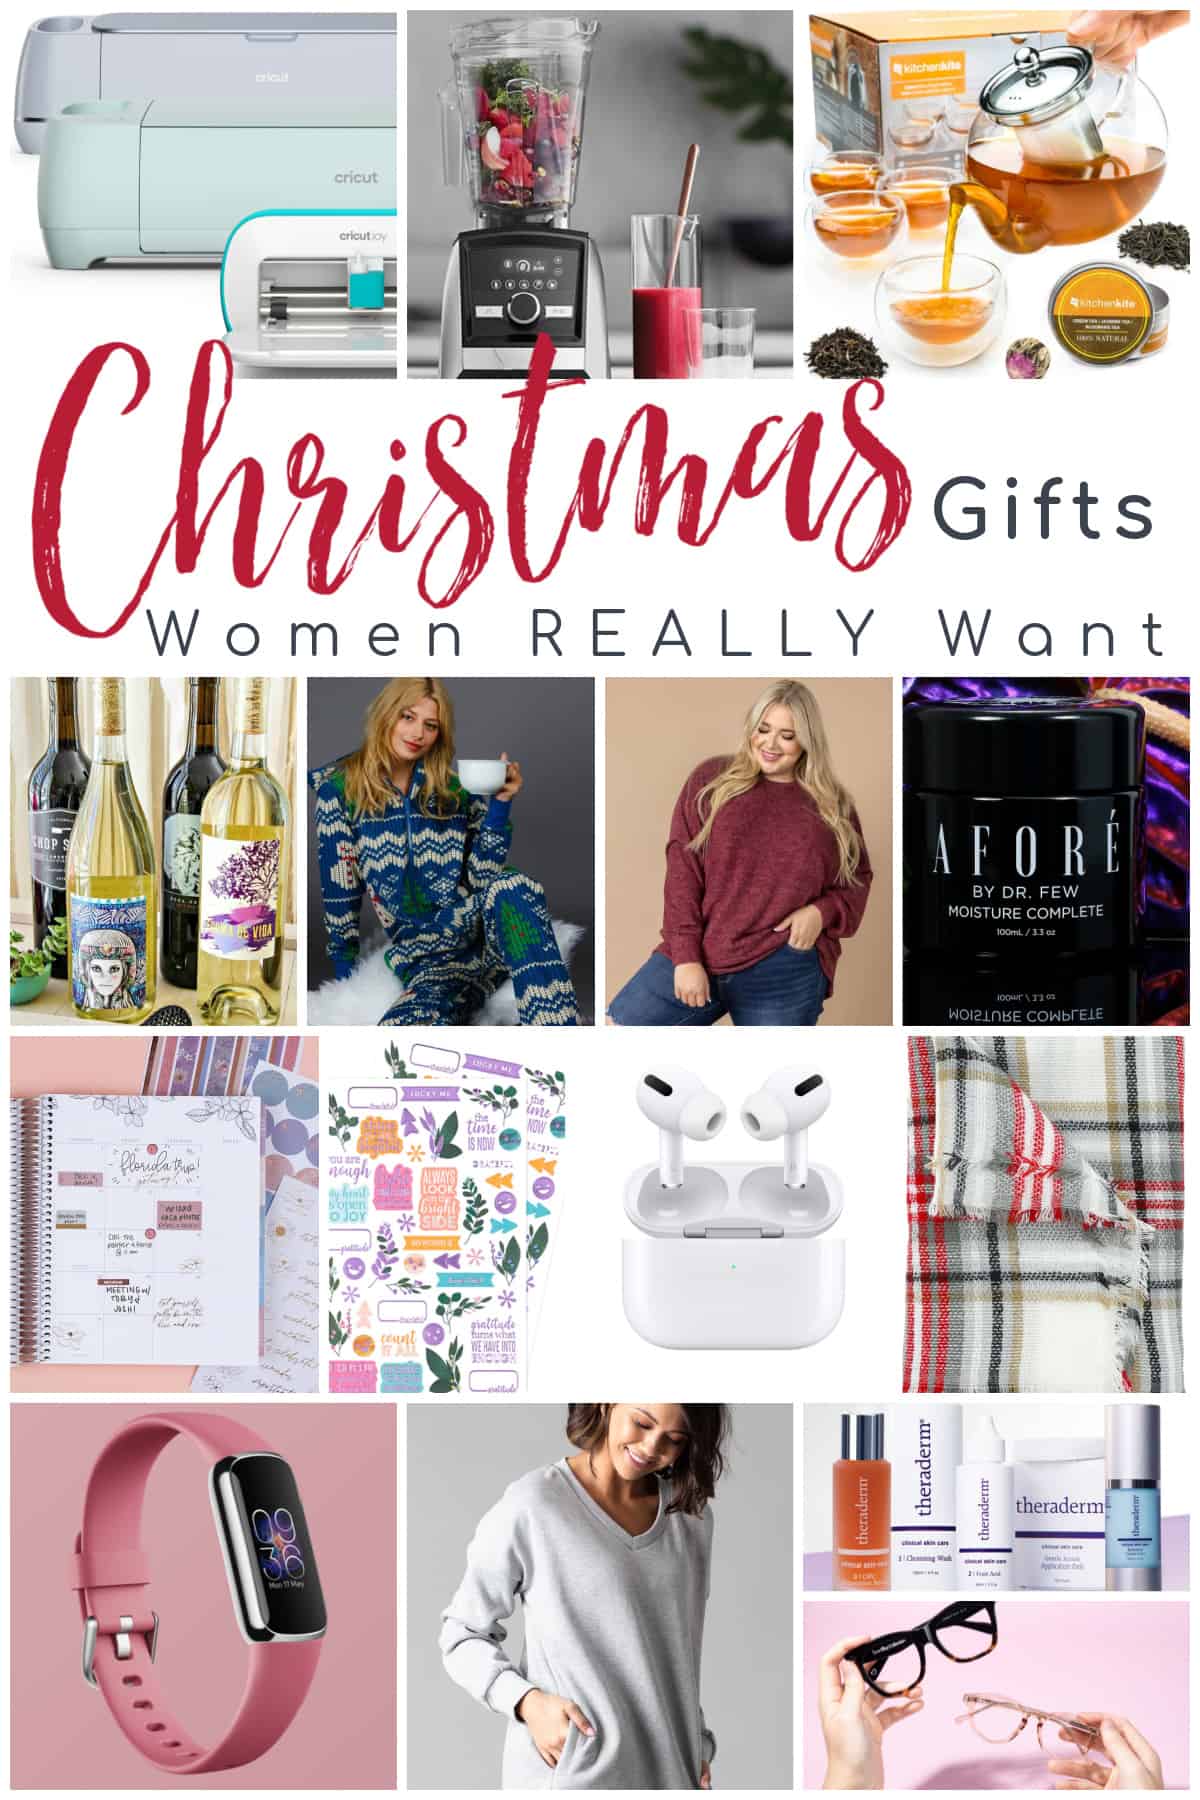 Photo collage of Christmas Ideas for Women - Text on Image says "Christmas Gifts Women Really Want"